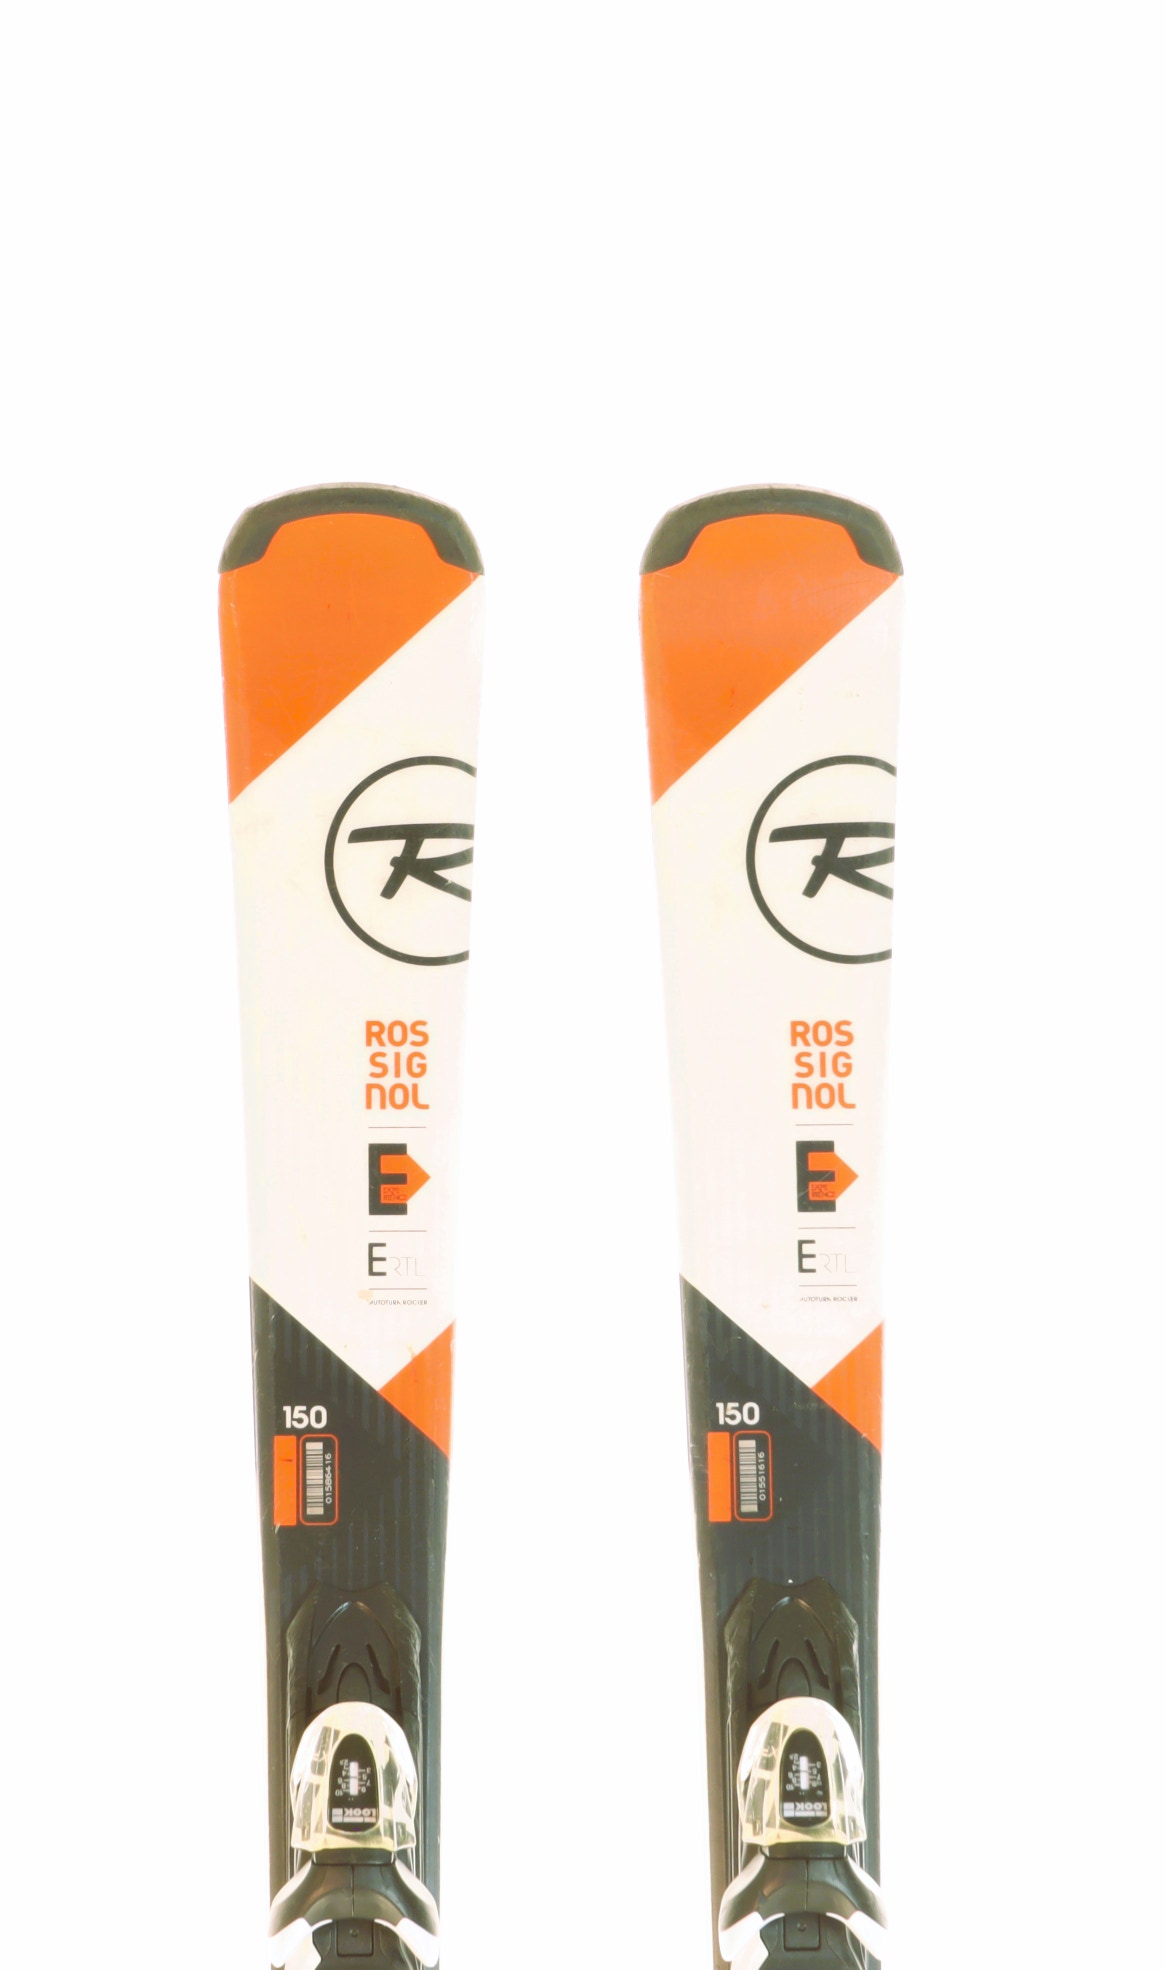 Used 2018 Rossignol Experience RTL 77 Skis With Look XPress 10 Bindings Size 150 (Option 230635)